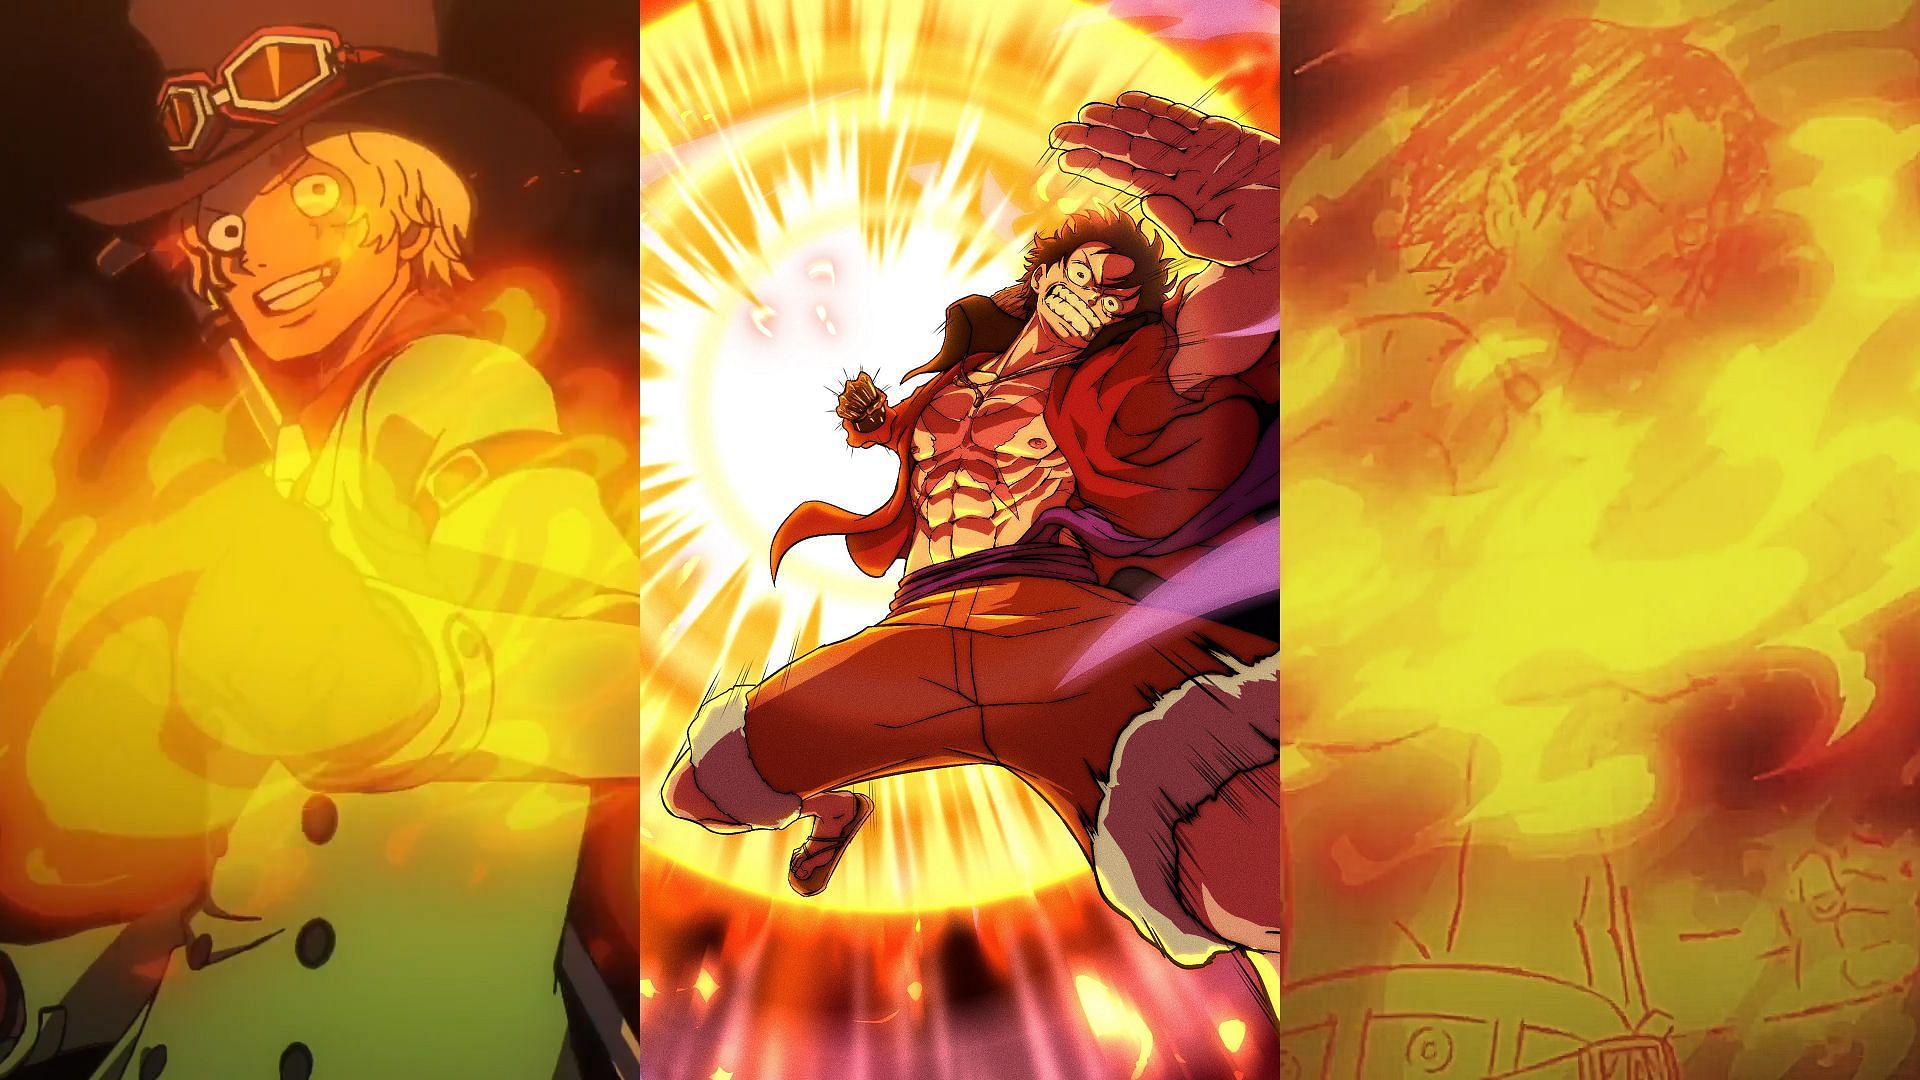 The three sworn brothers Sabo, Luffy, and Ace, are all powerful fire users (Image via Toei Animation, One Piece)